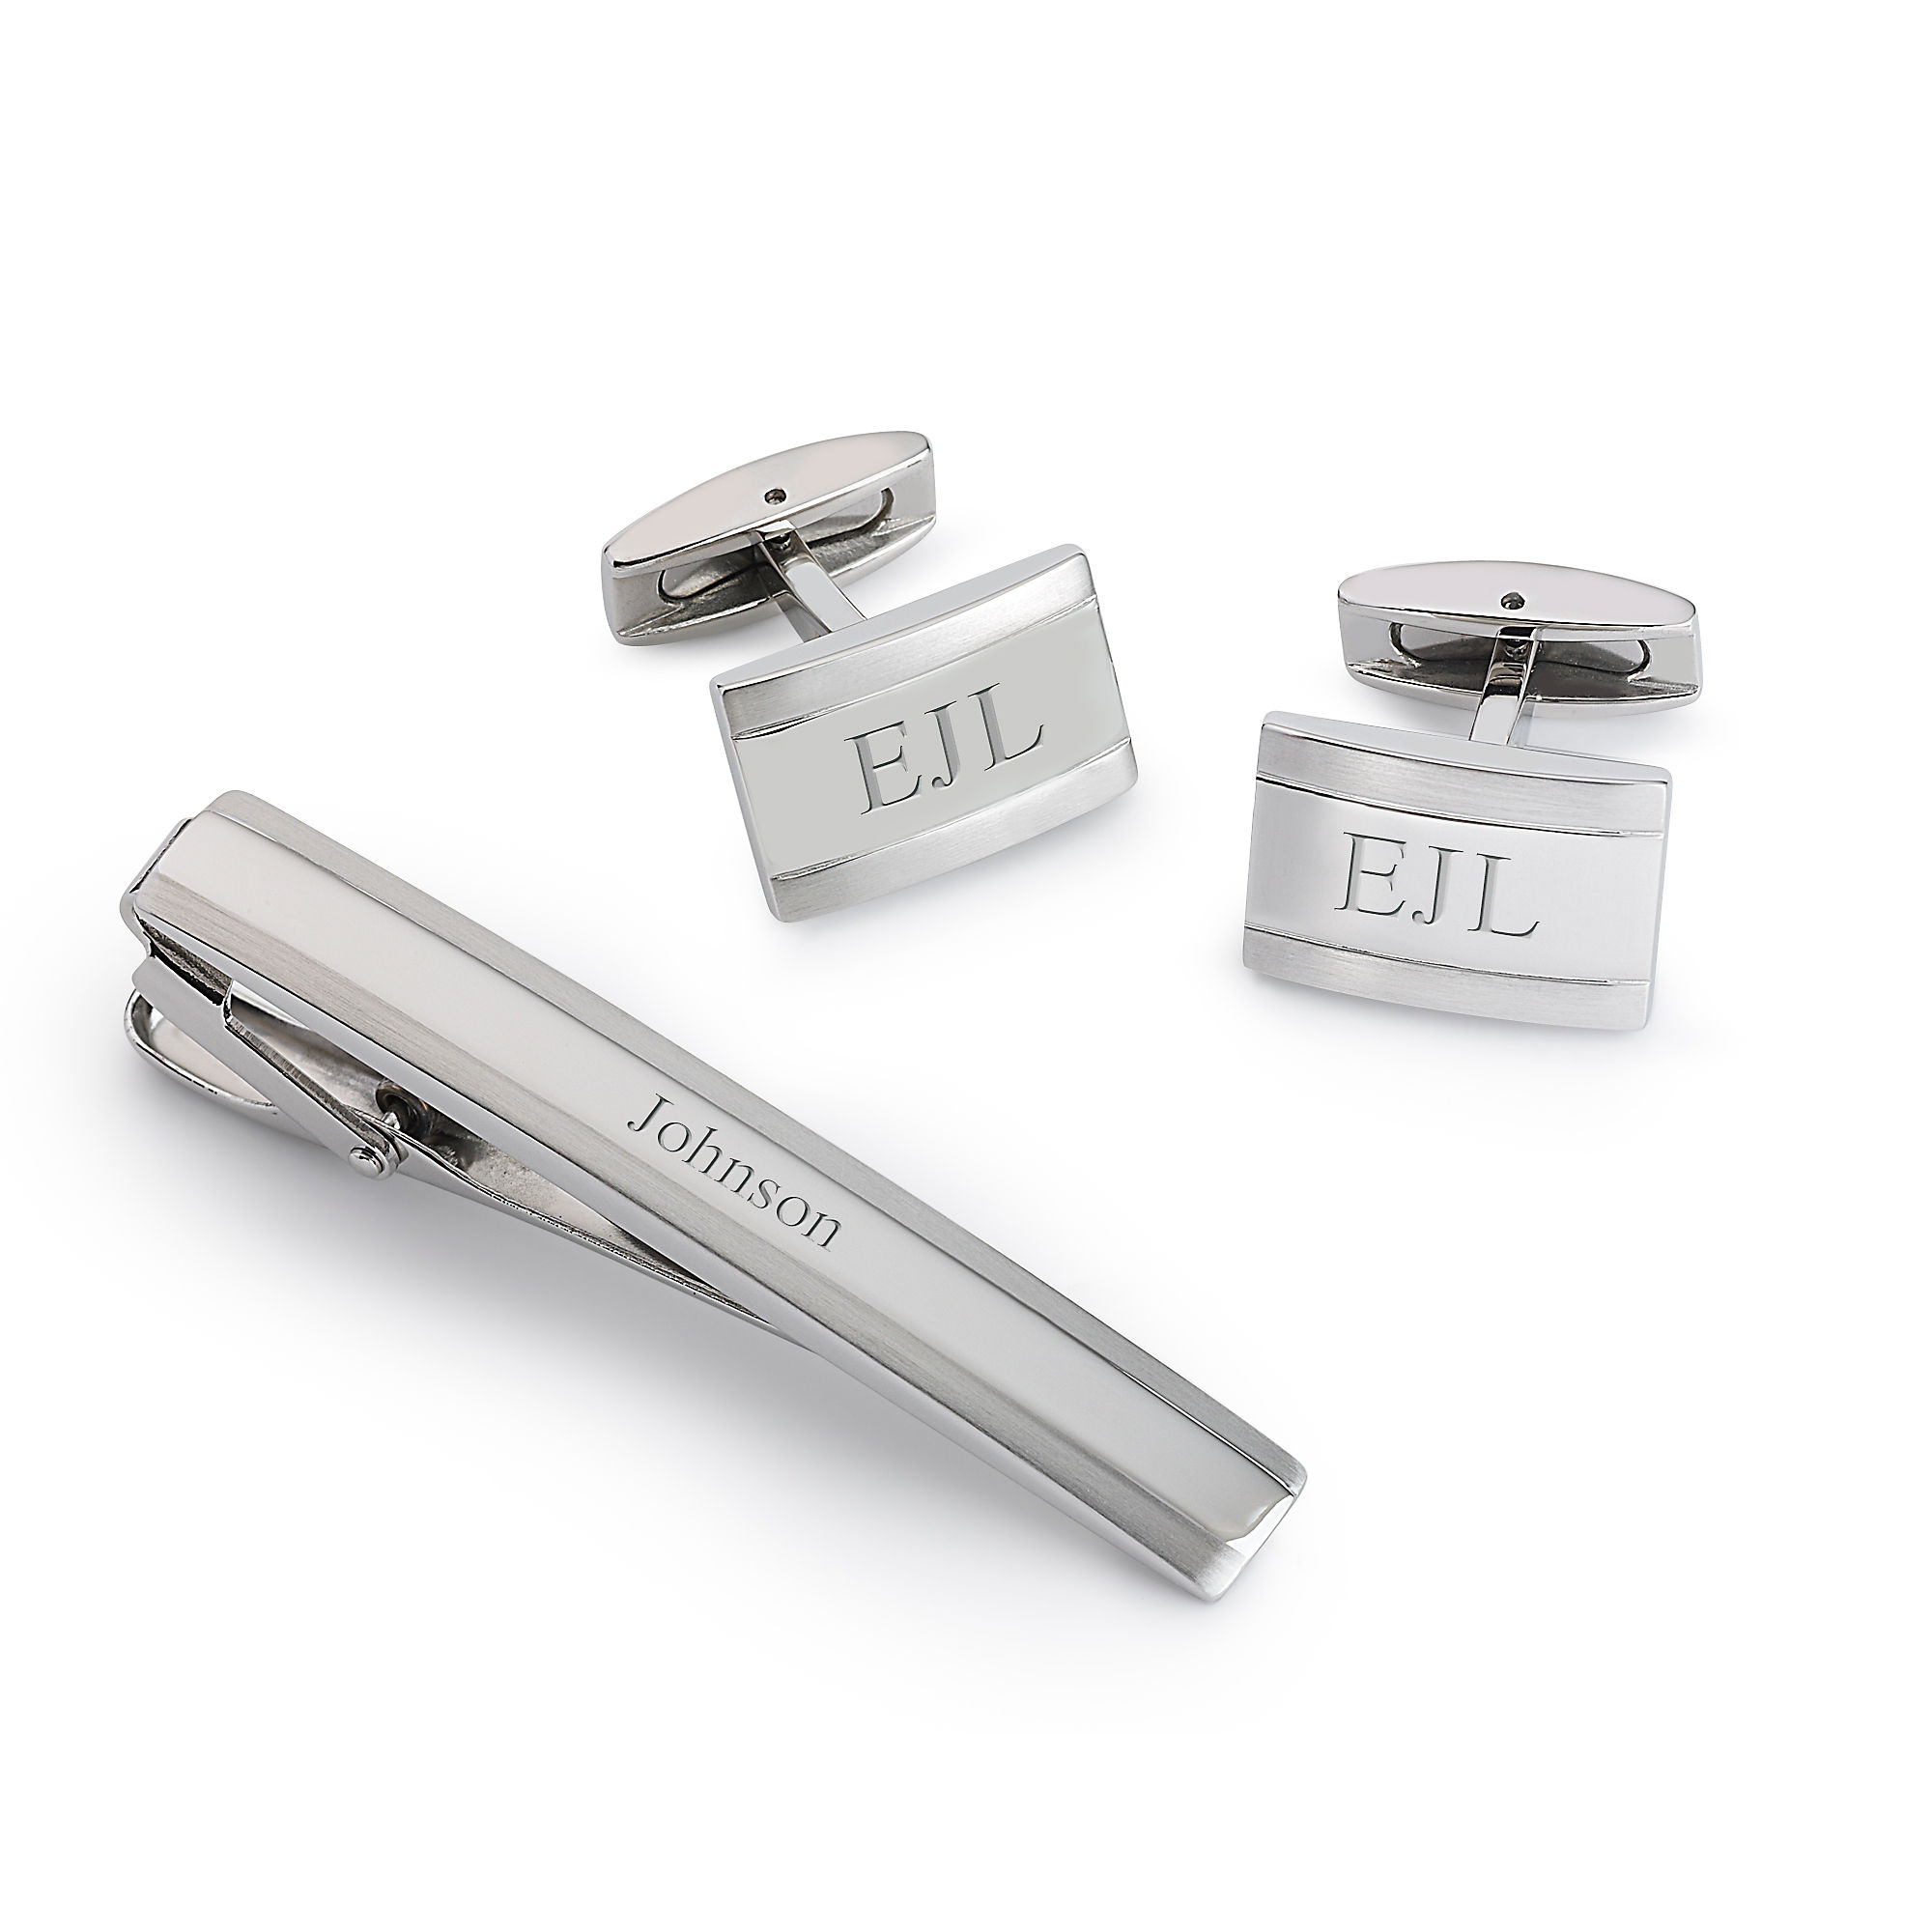 Things Remembered Personalized Stainless Steel Tie Clip and Cuff Links Set with Engraving Included 